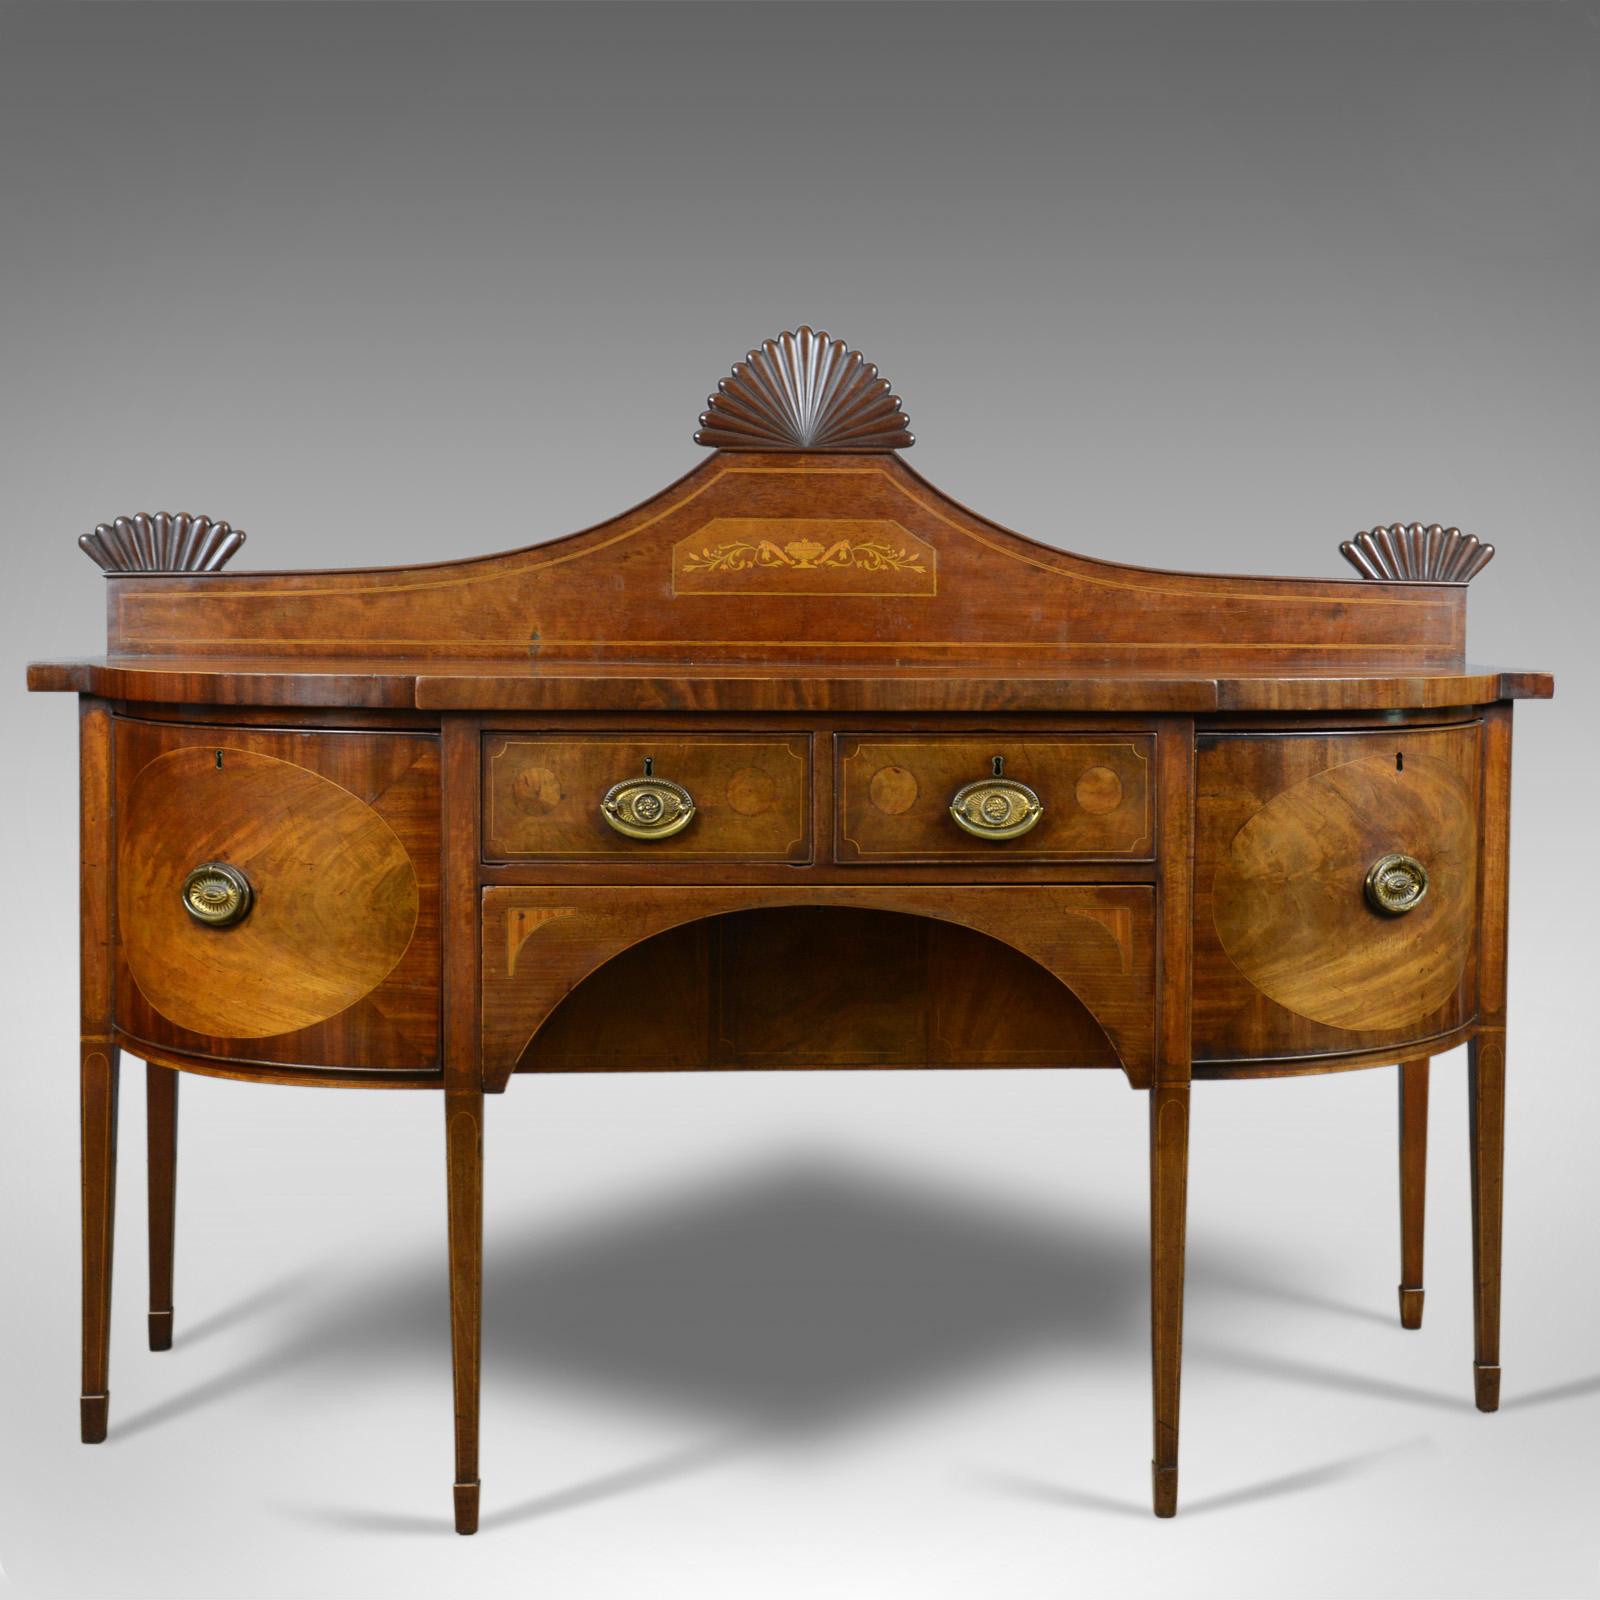 This is a large antique sideboard, an English, late Georgian server in mahogany dating to circa 1800.

Select mahogany with grain interest throughout
Desirable aged patina in the lustrous, wax polished finish
Displaying Sheraton influence and